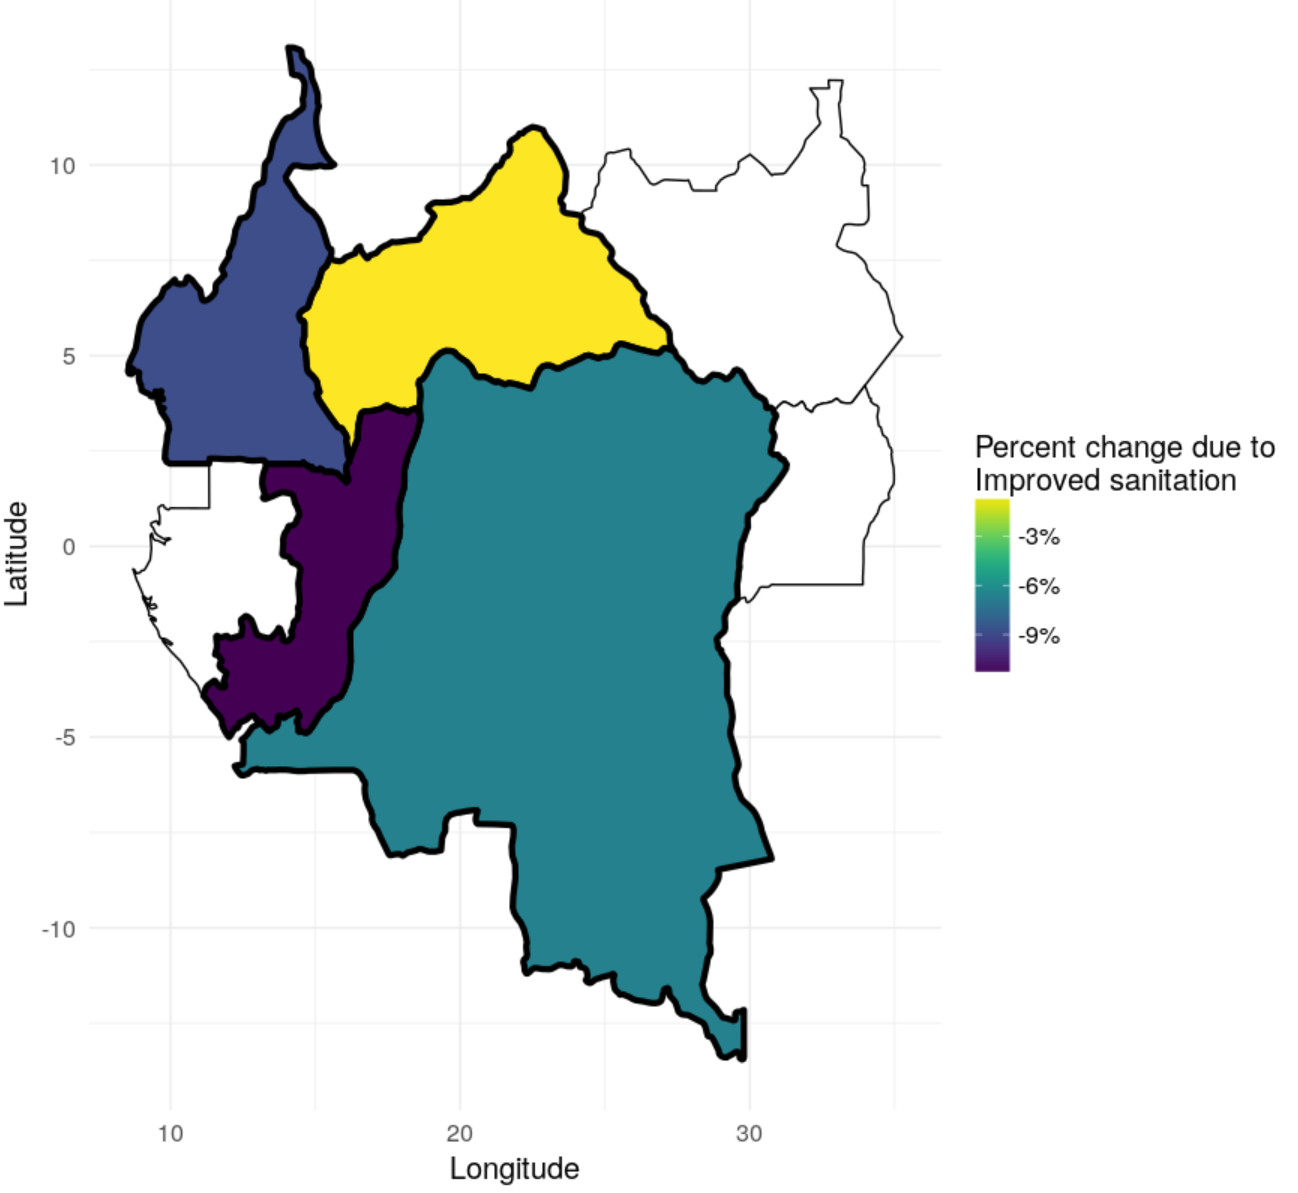 Map of 4 countries showing percent change in diarrhea mortality due to improved sanitation